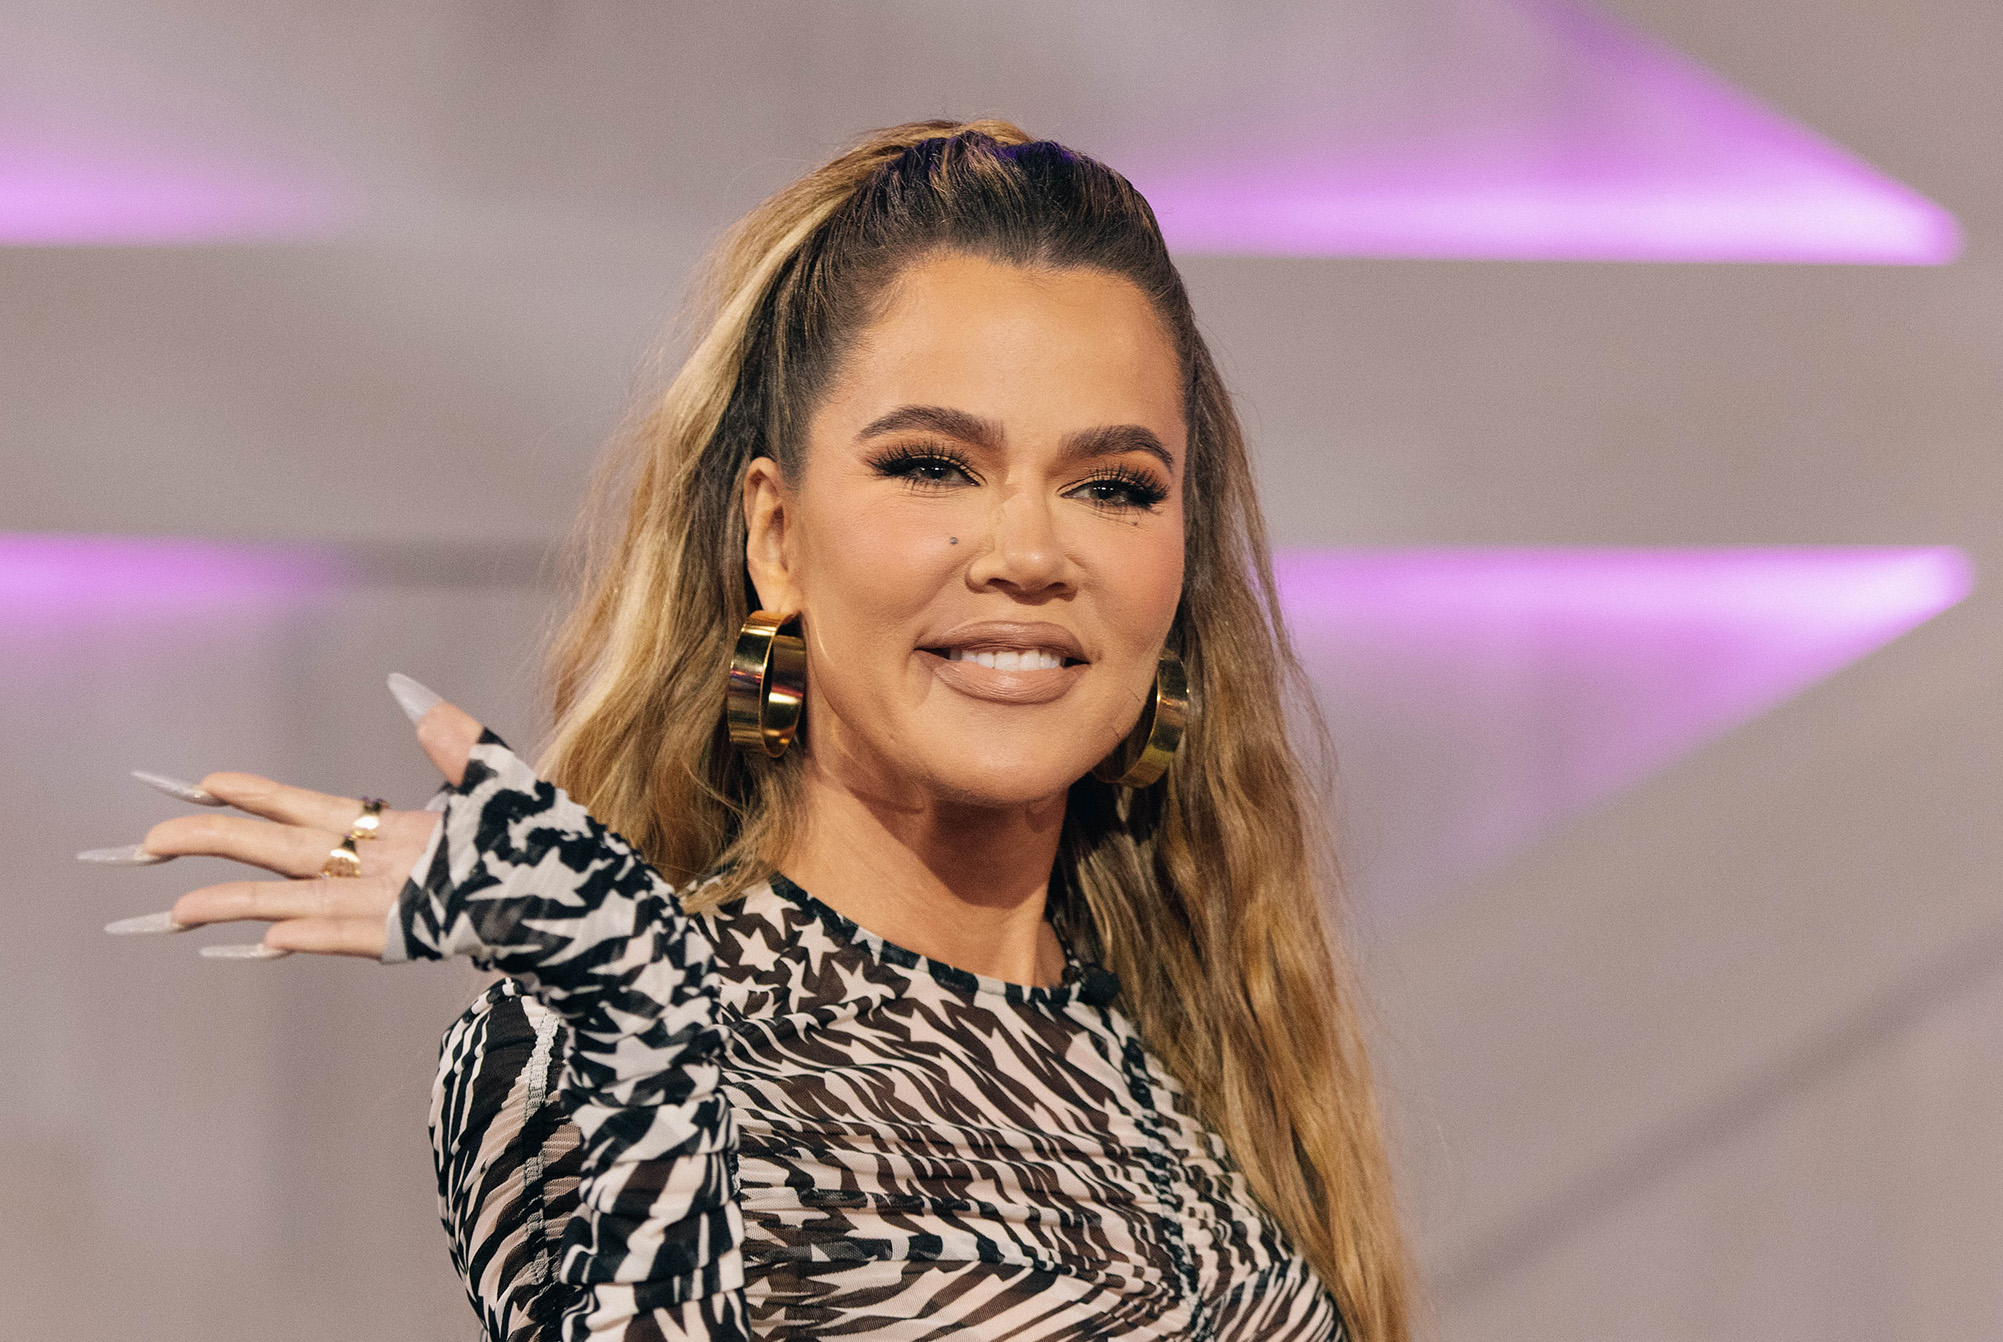 Khloé Kardashian found it difficult to bond with her surrogate-born son due to the transactional nature of the experience.